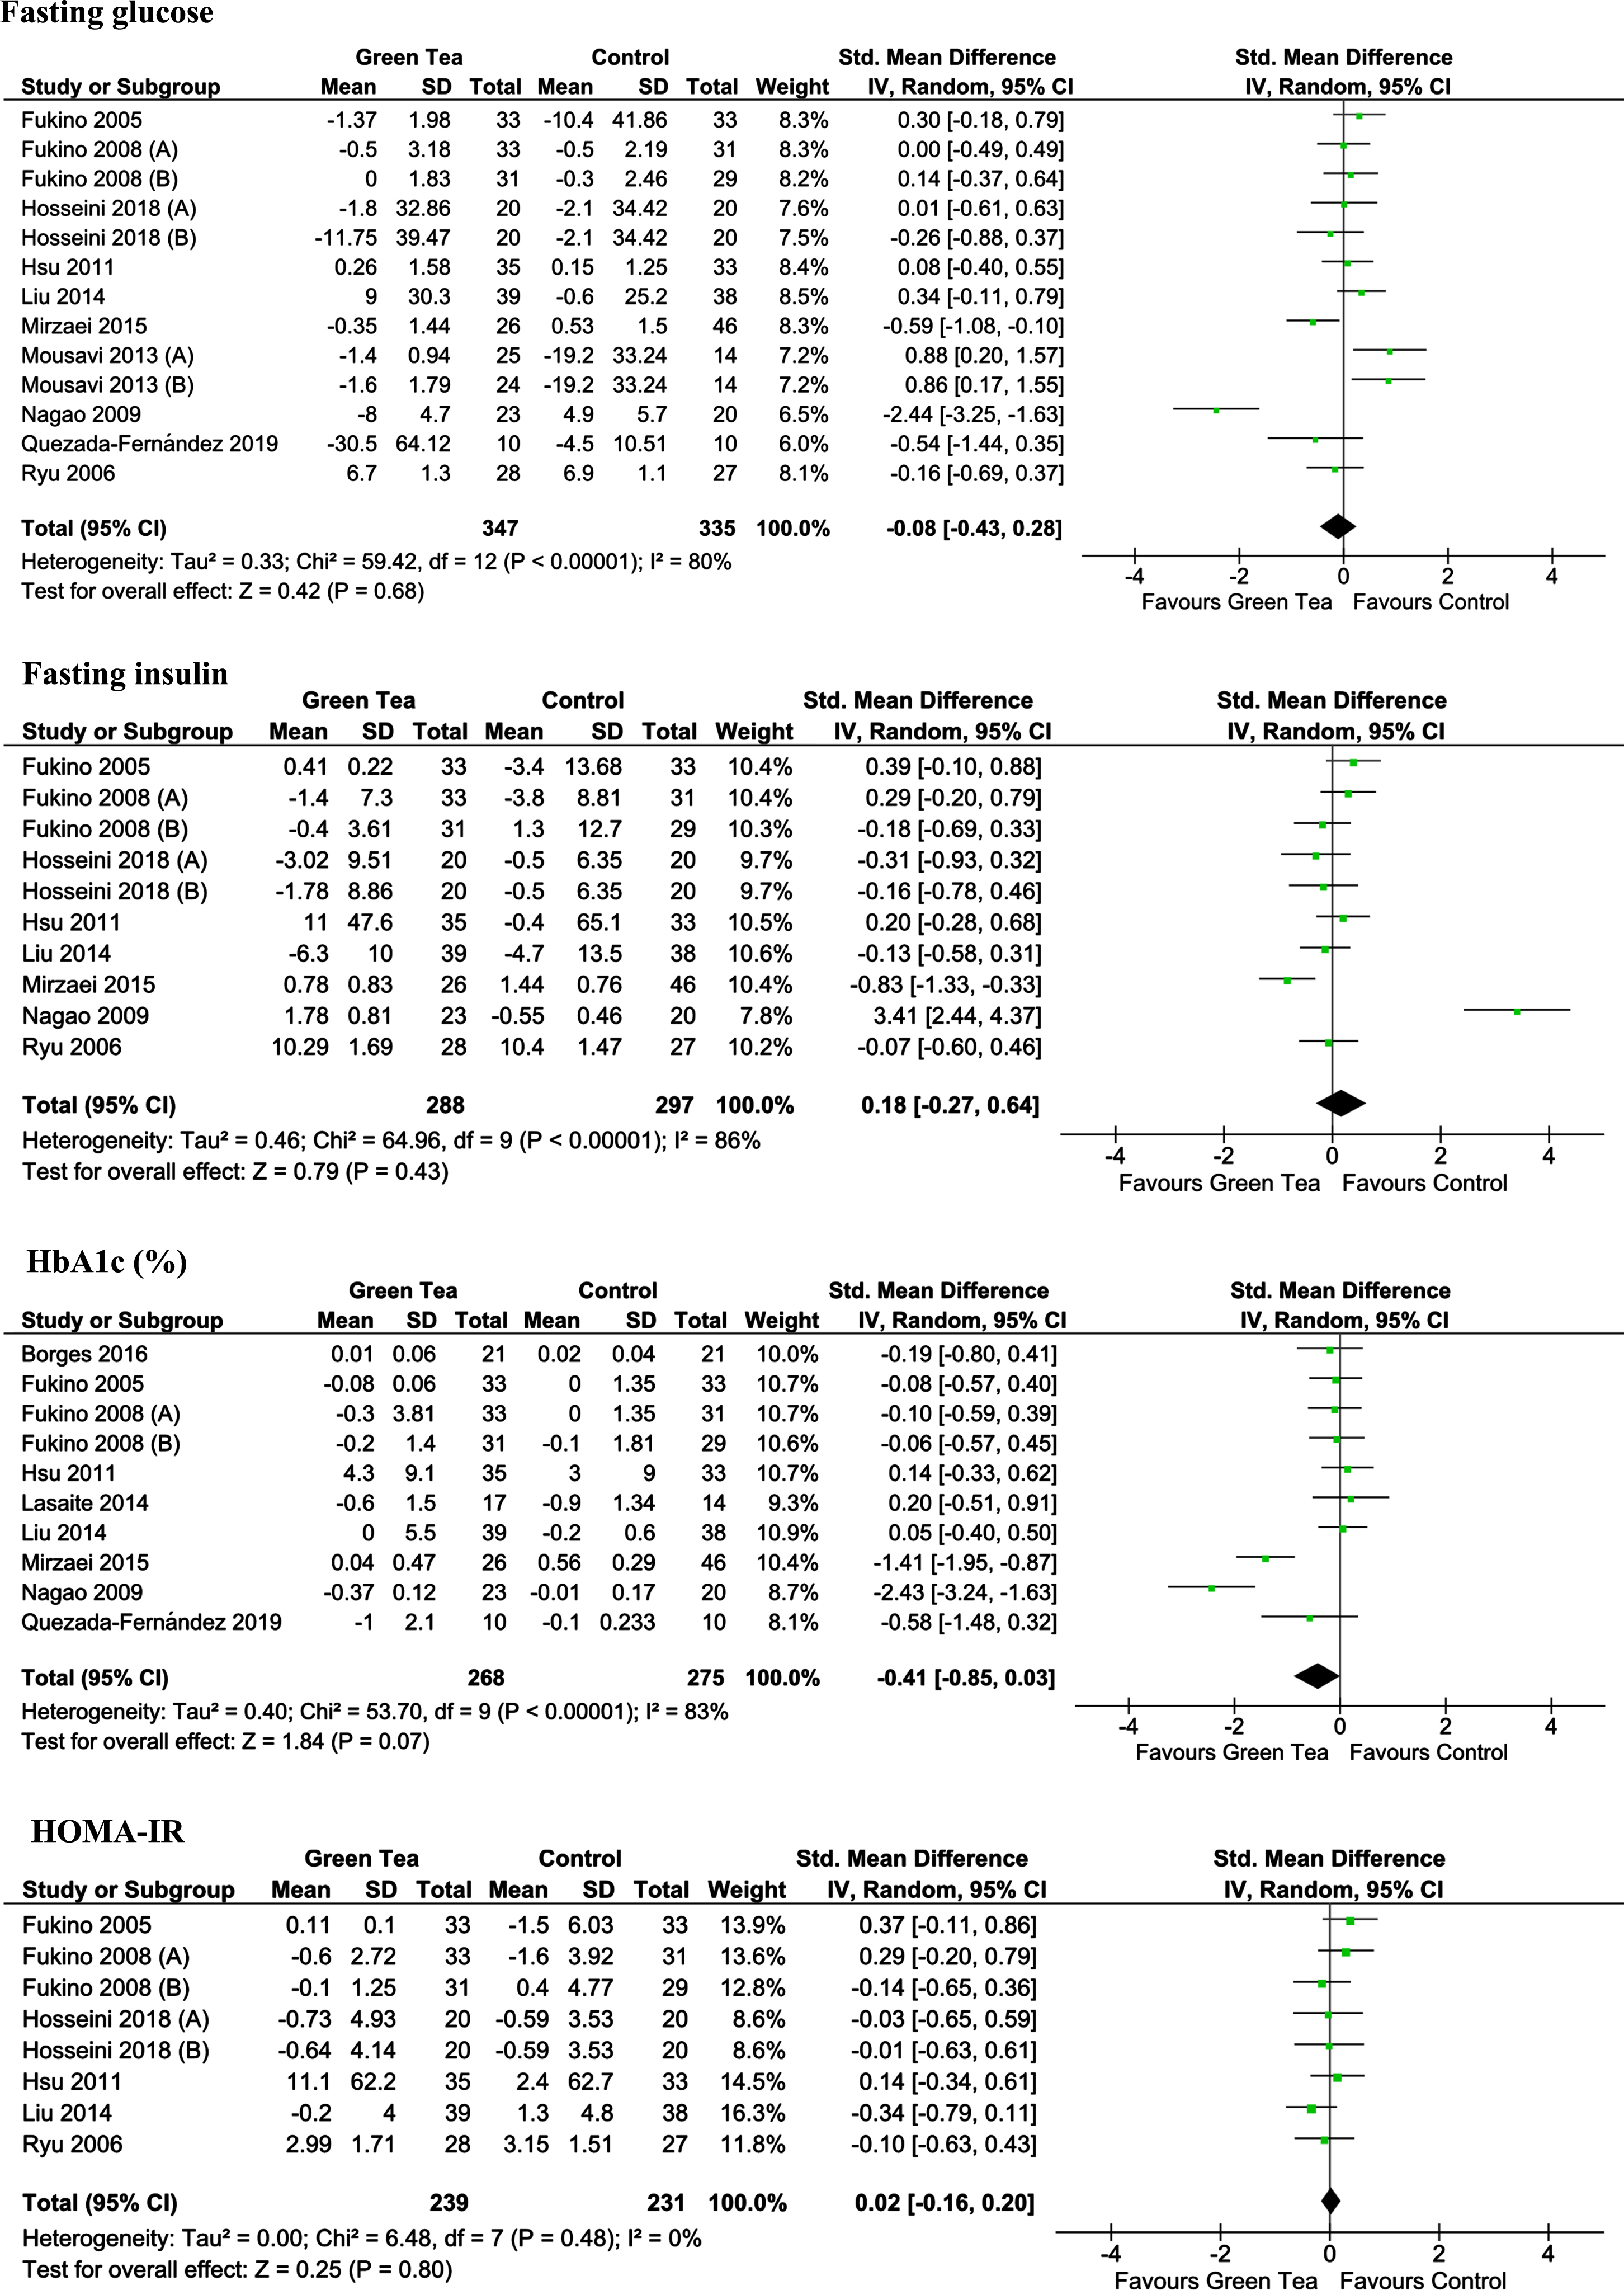 Meta-analysis results of green tea for each assessed outcome.